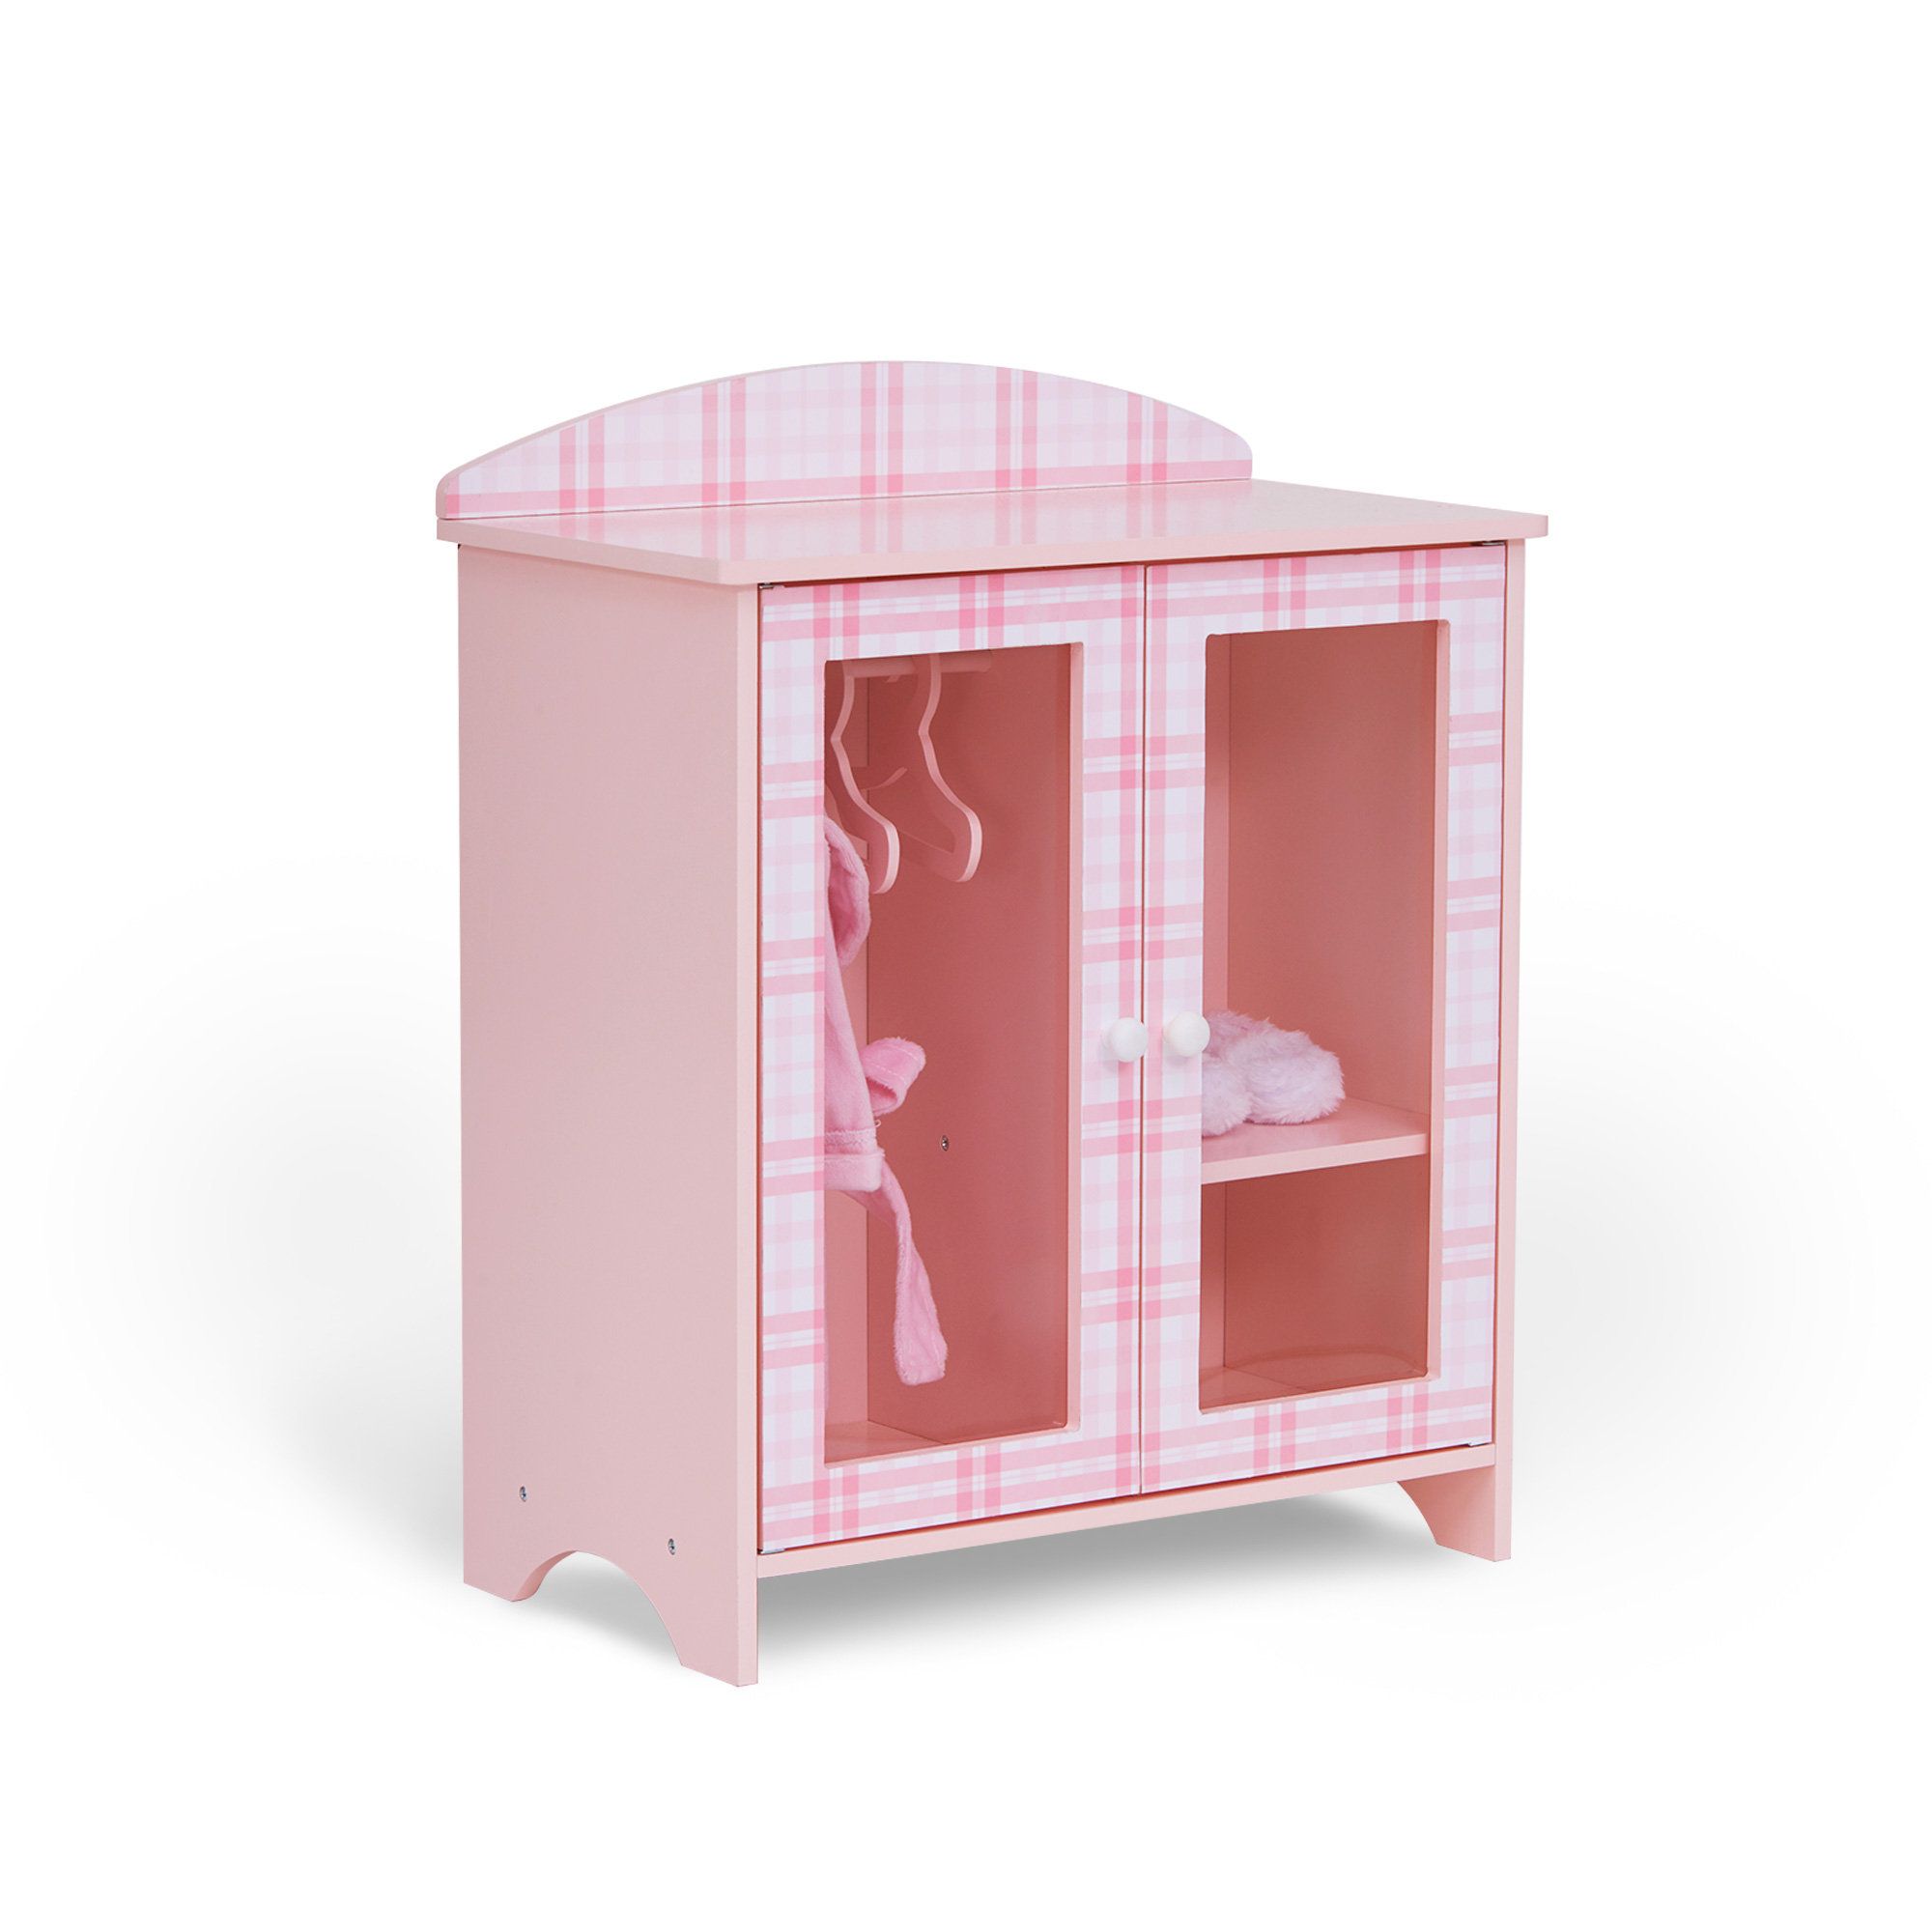 Sophia's Princess Closet Dollhouse Furniture And Accessories | Wayfair Intended For The Princess Wardrobes (View 13 of 20)